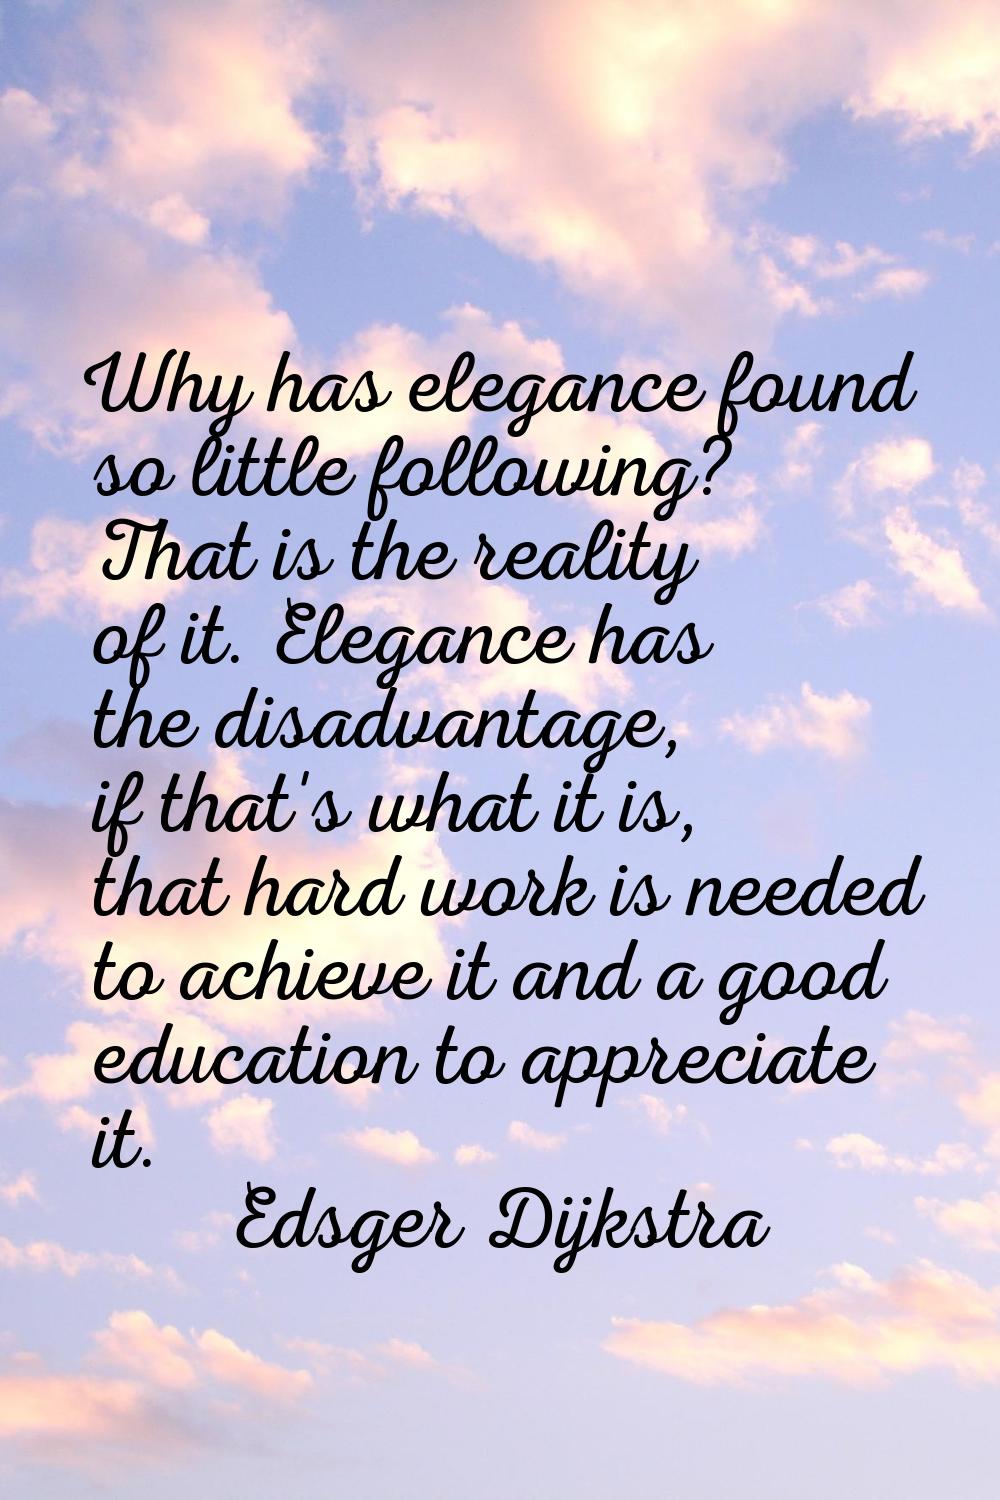 Why has elegance found so little following? That is the reality of it. Elegance has the disadvantag